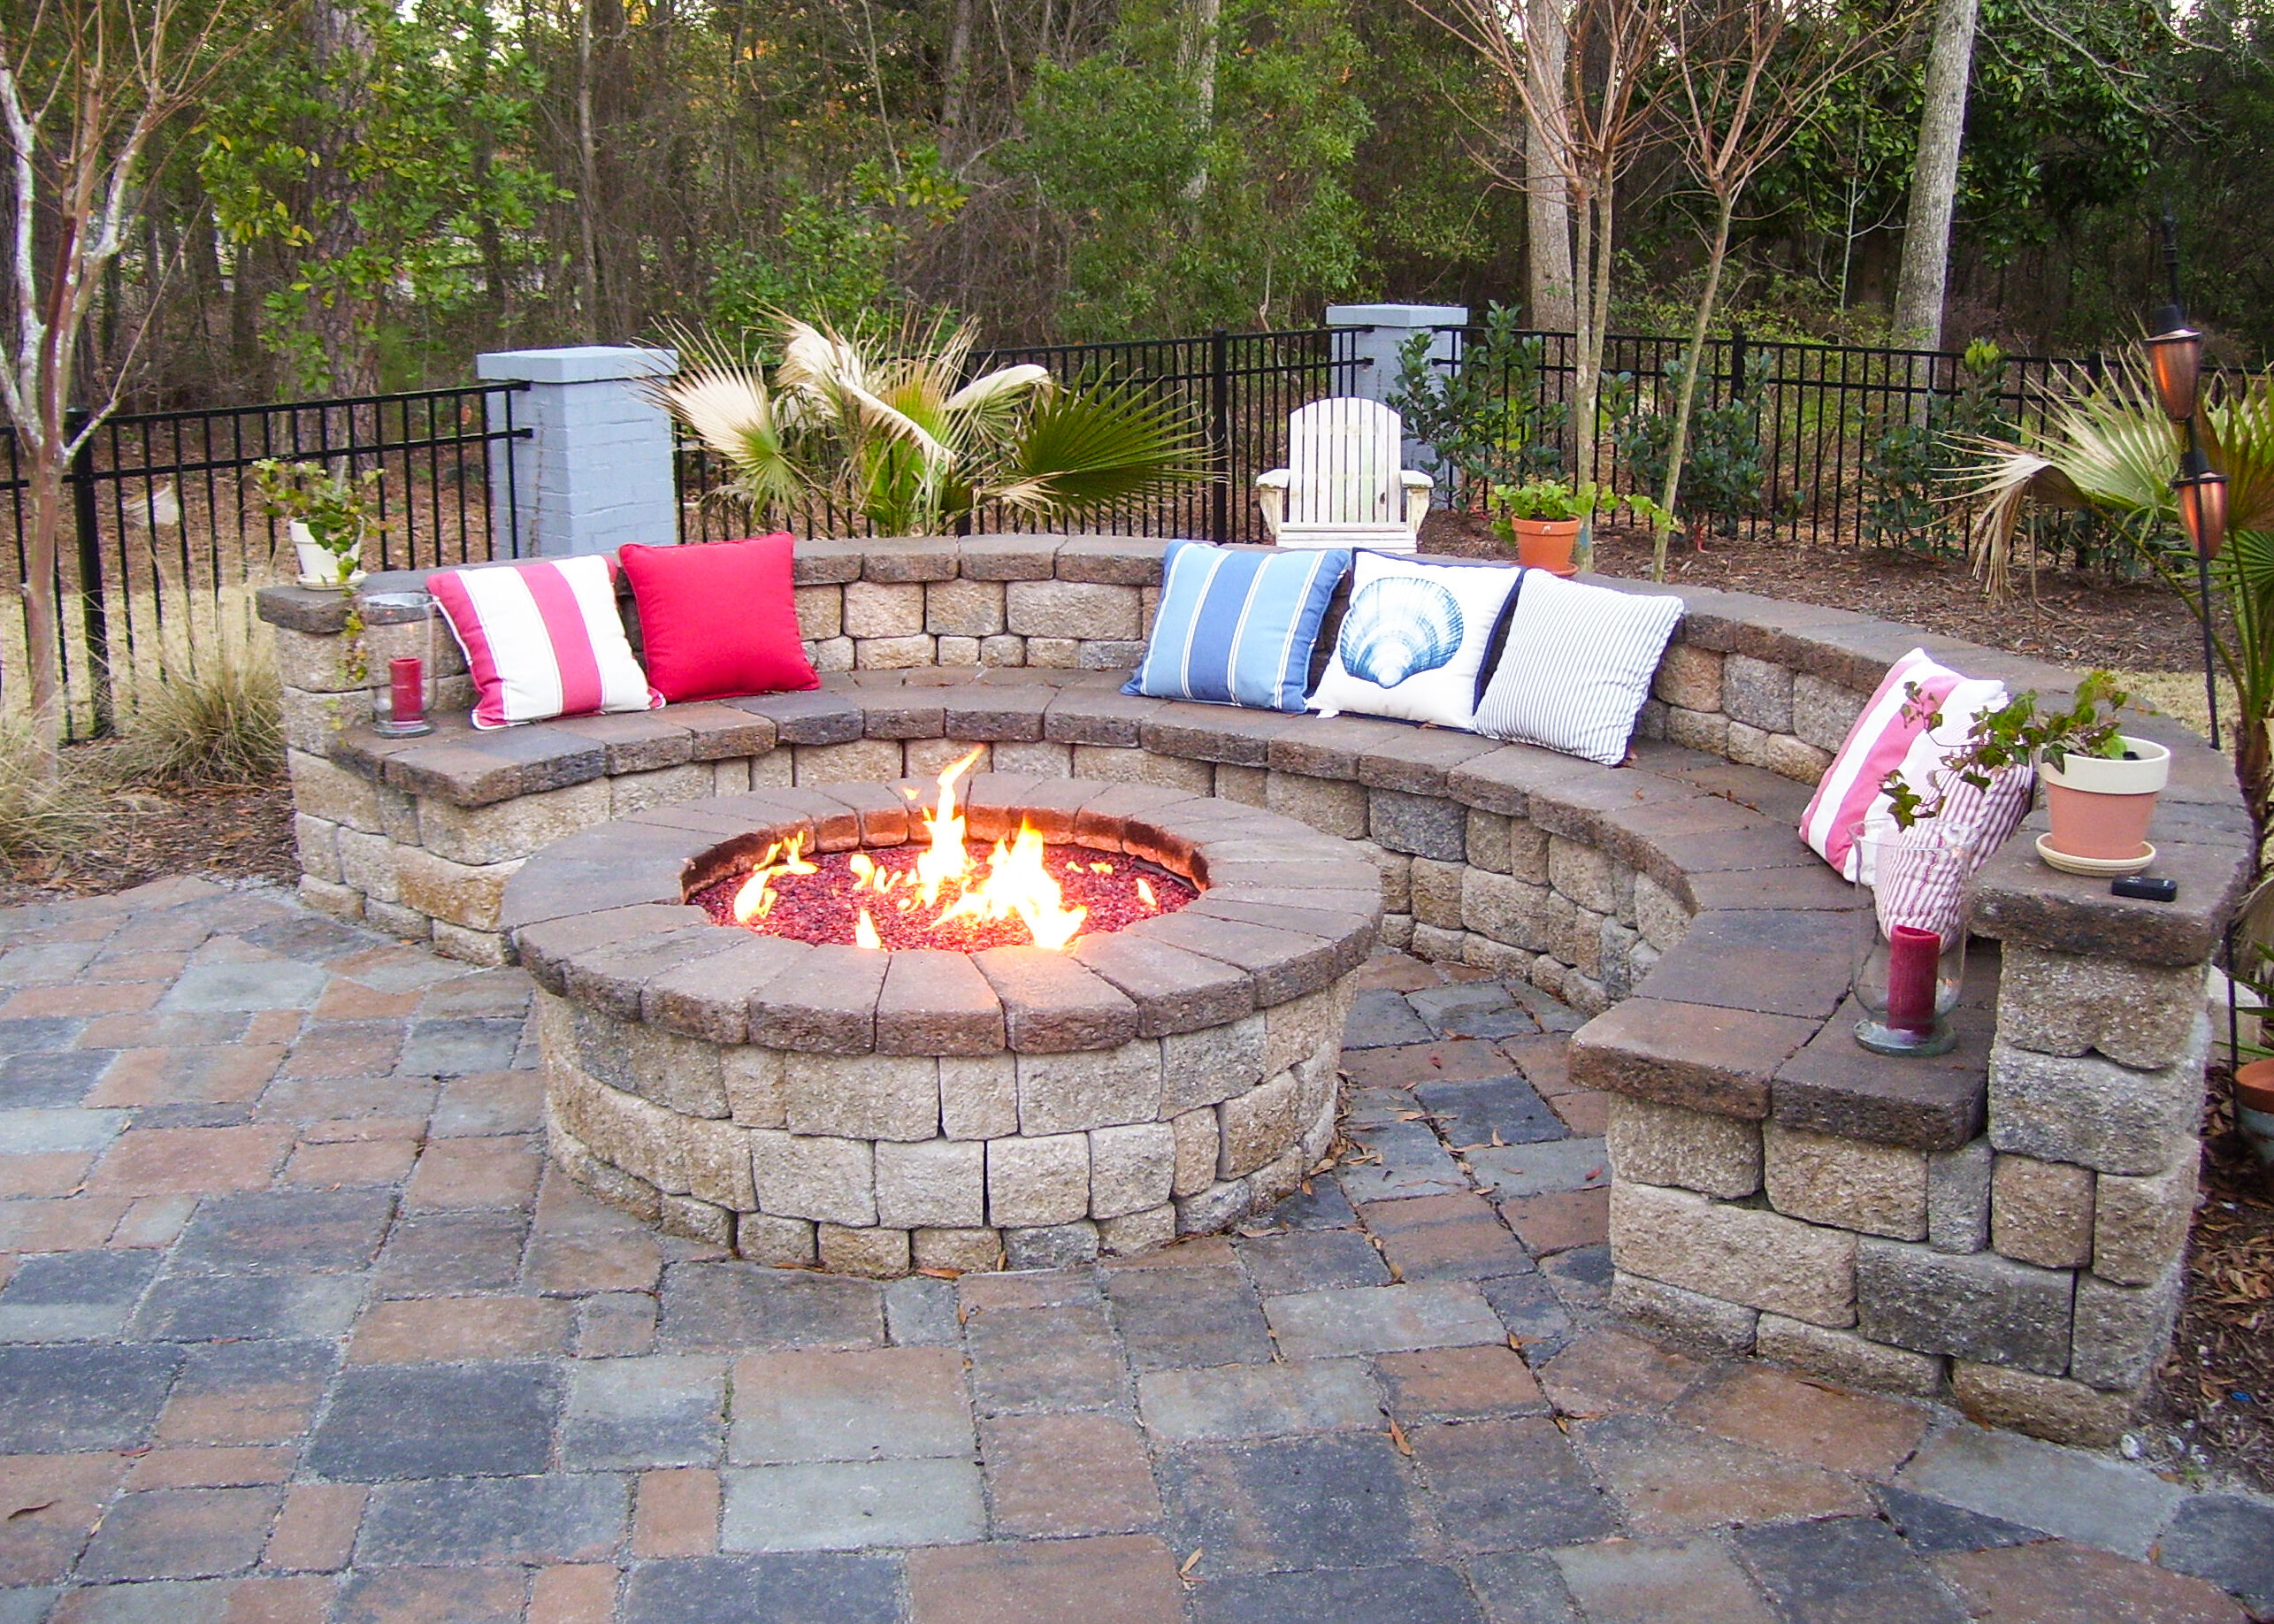 3 Easy Diy Fire Pit Ideas, How To Build A Stone Fire Pit